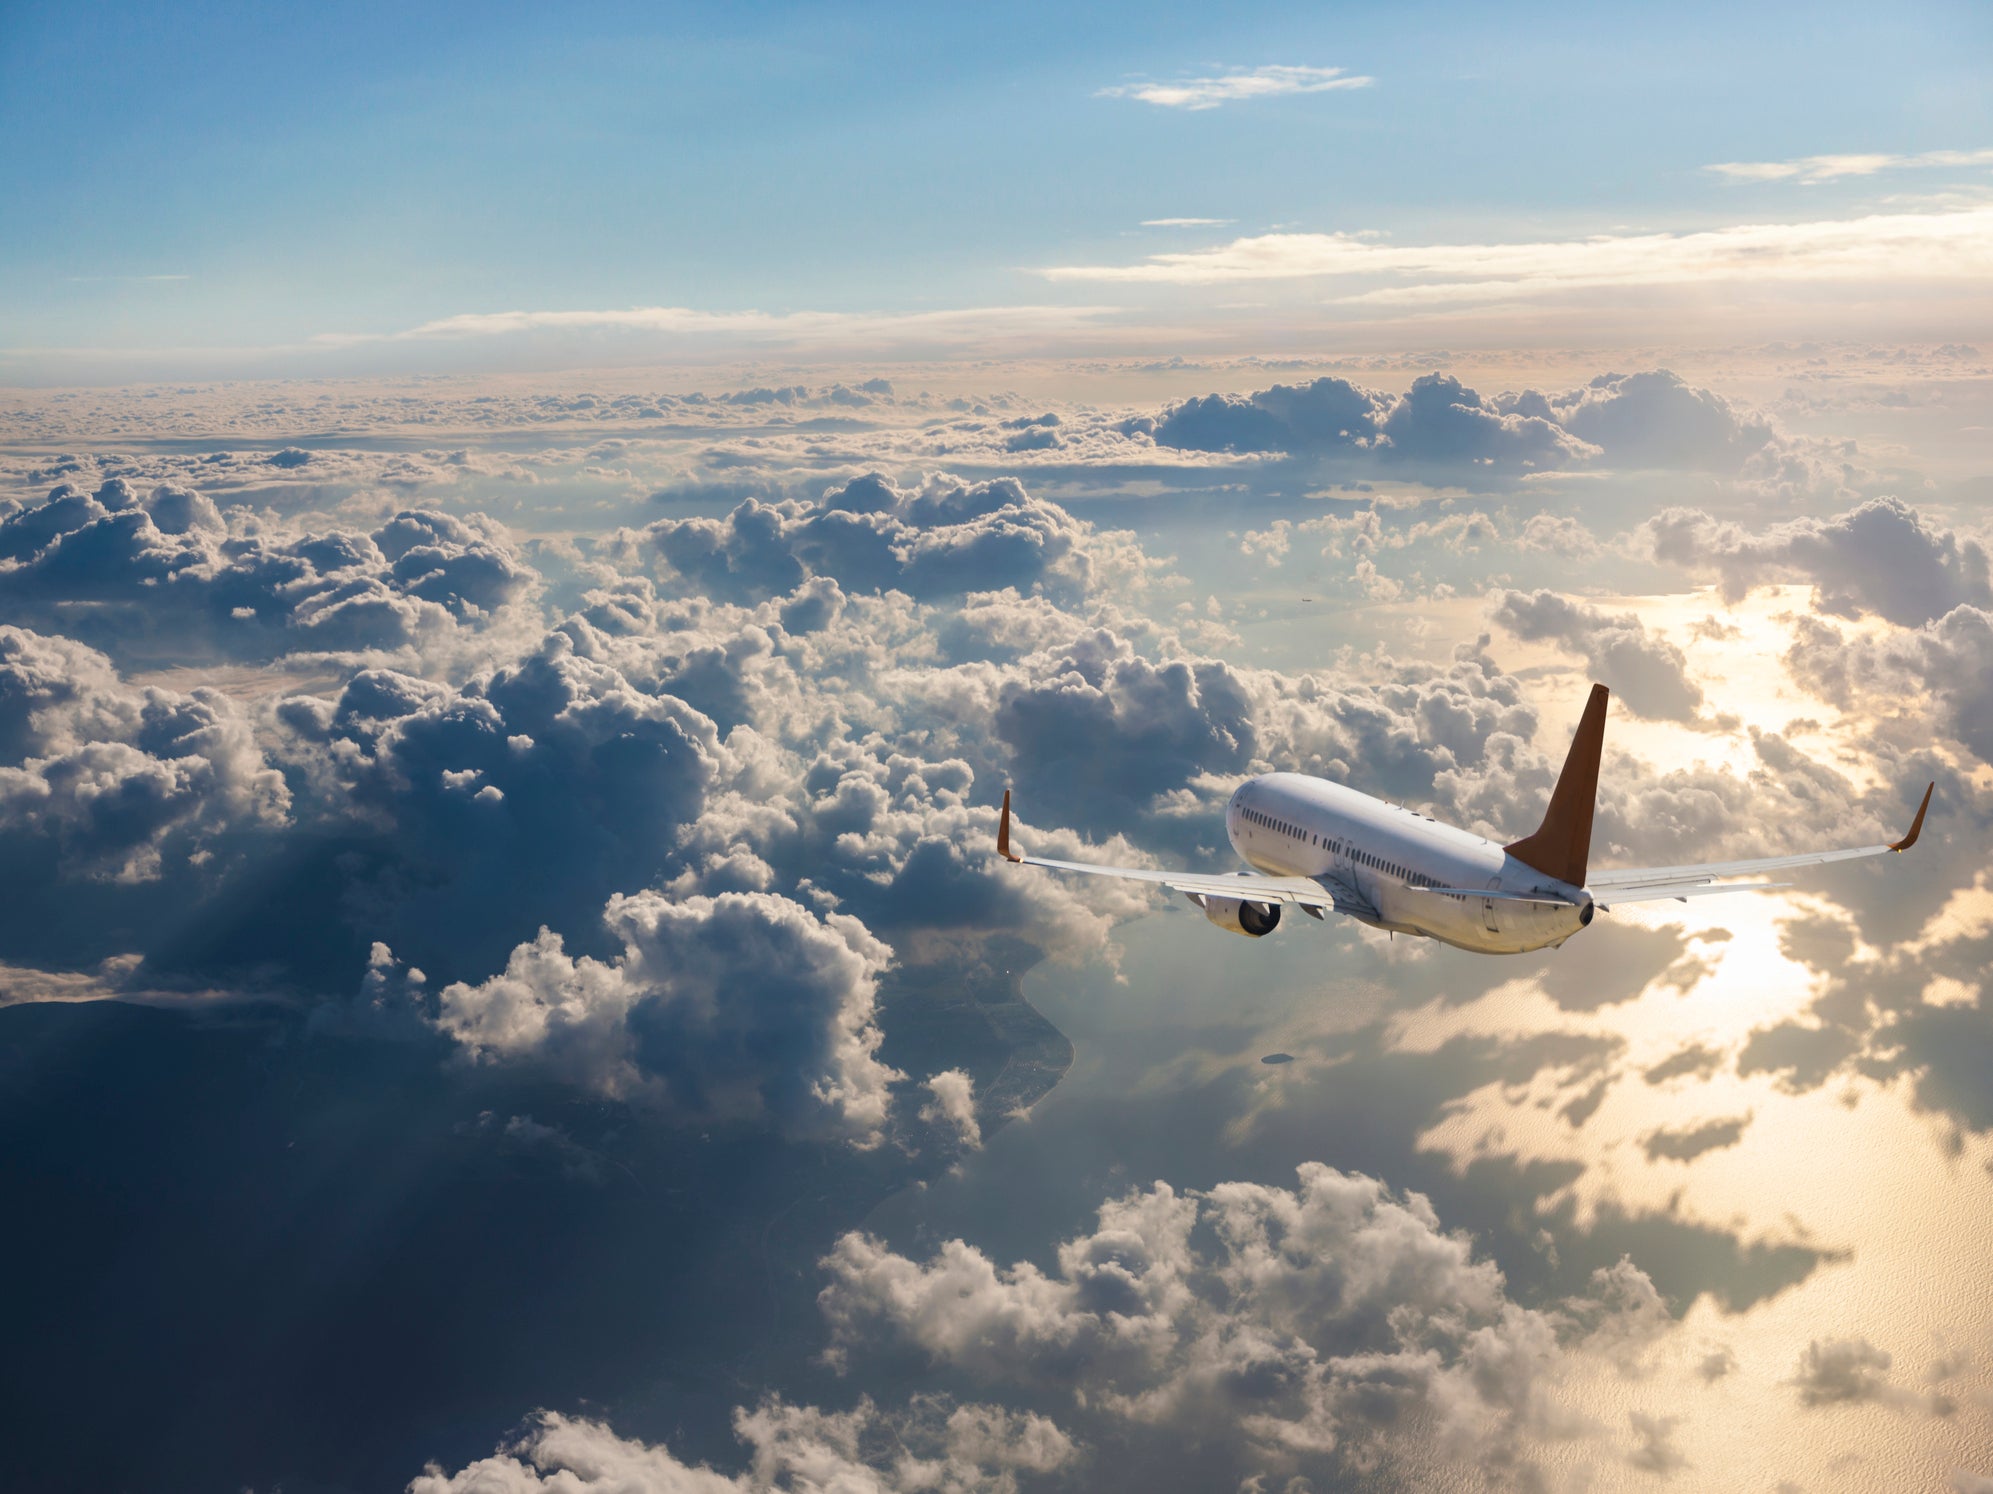 Airlines are looking to reach net zero carbon emissions by 2050